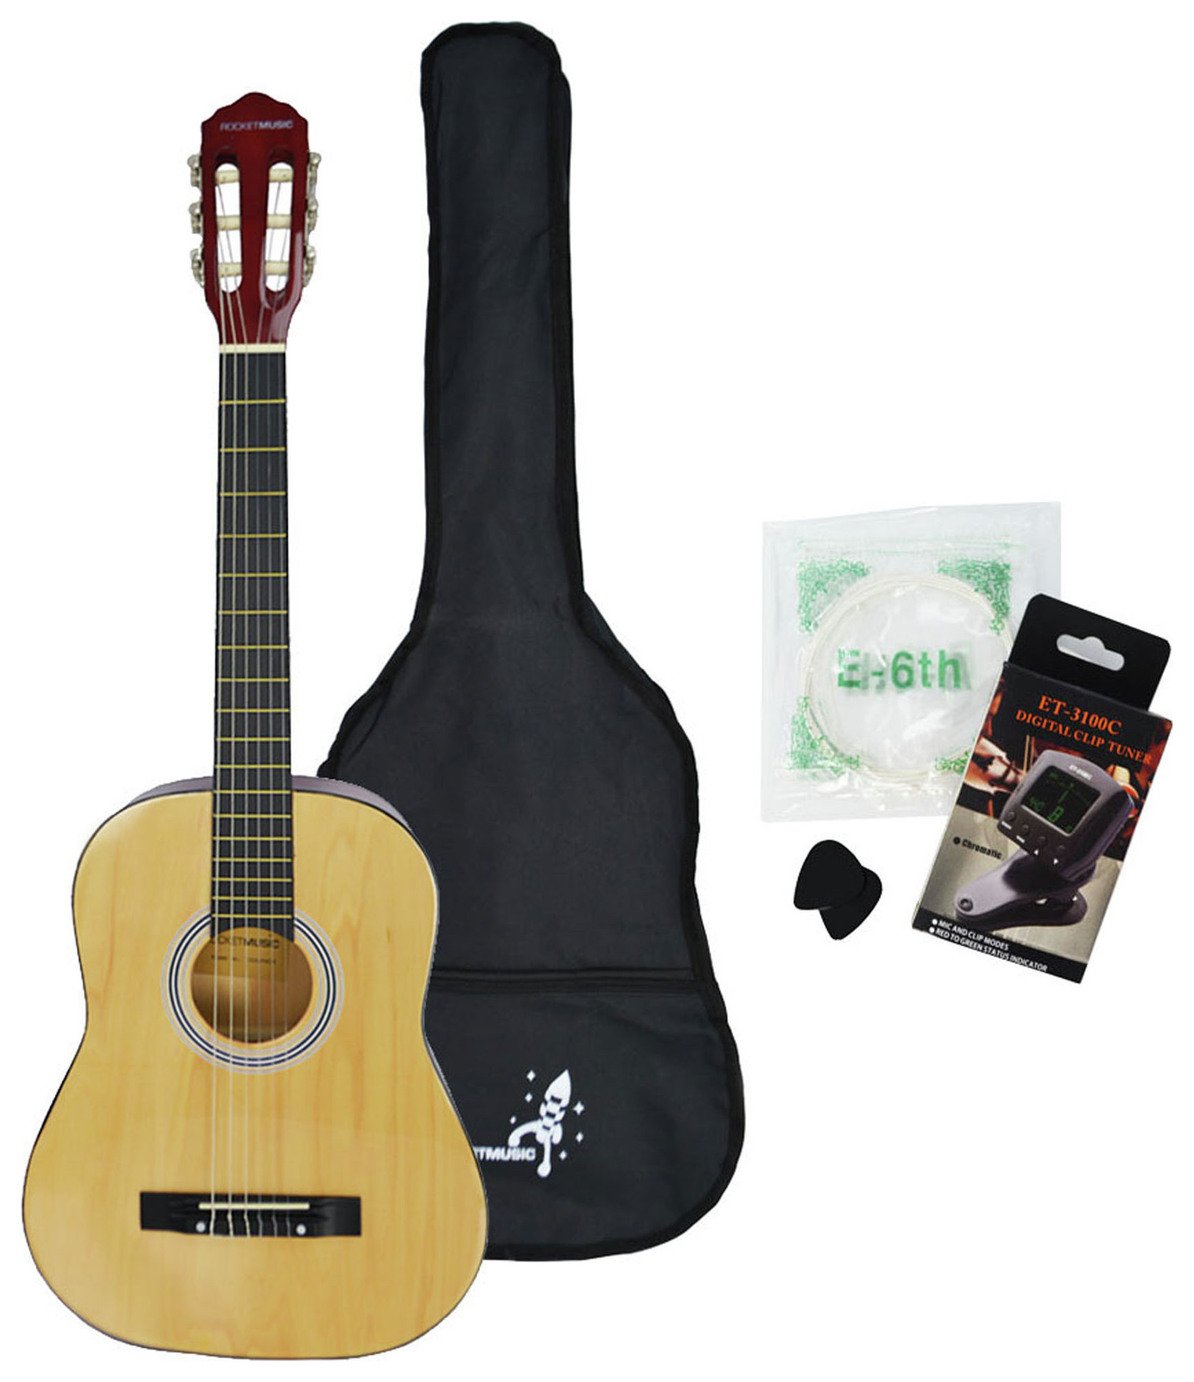 Rocket 3/4 Size Classical Acoustic Guitar and Accessories review